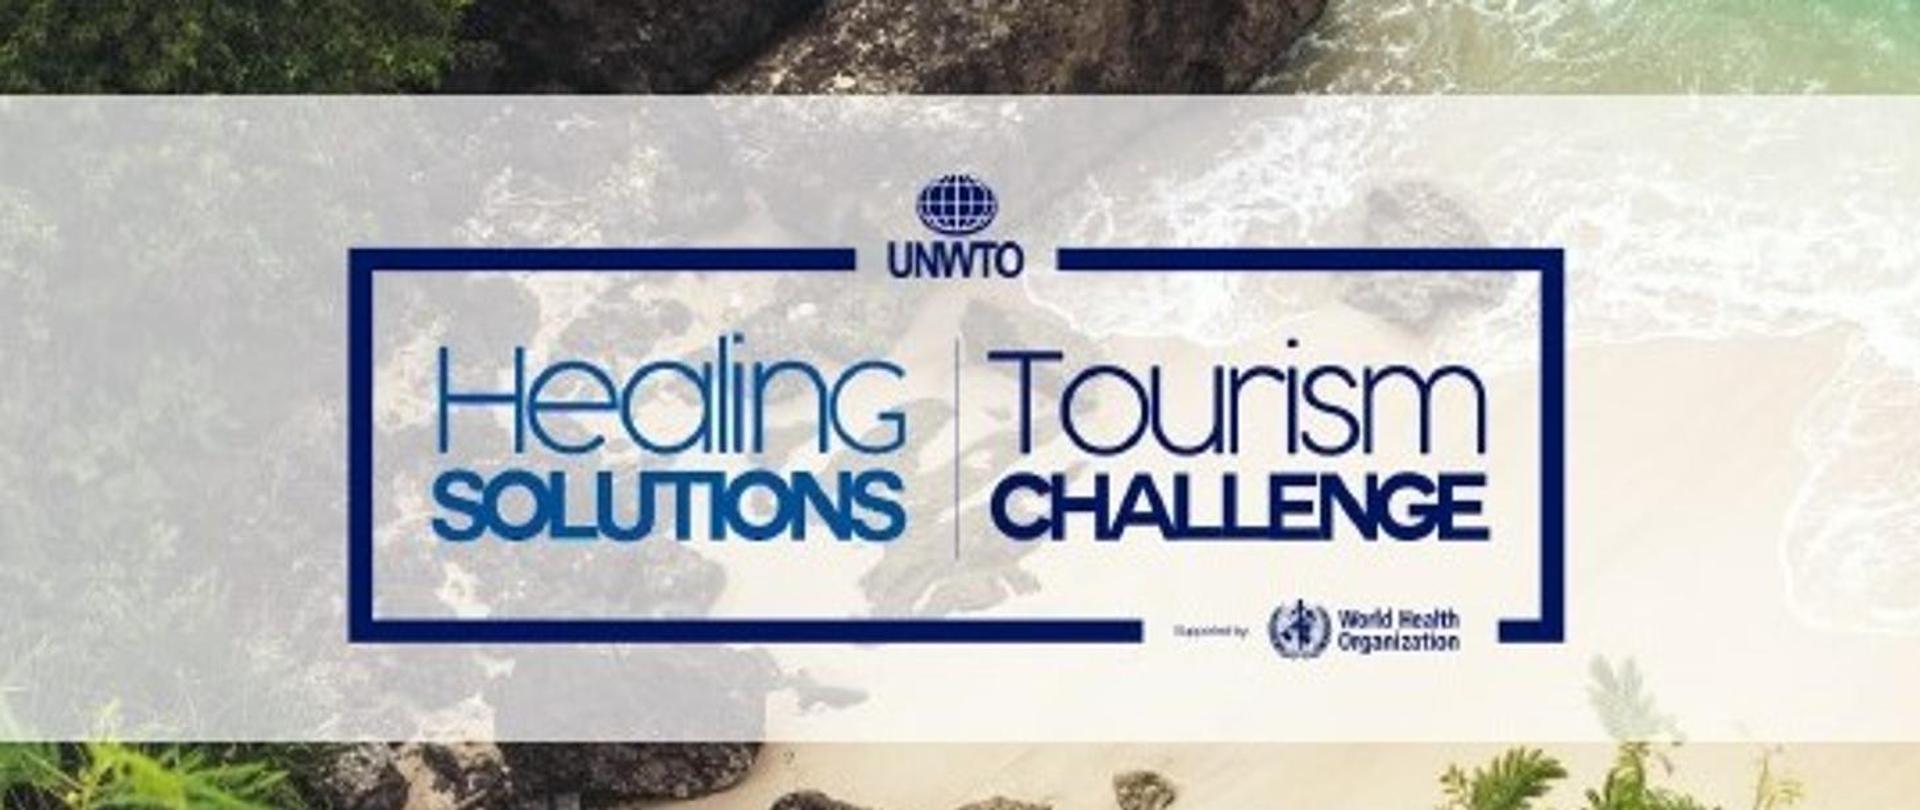 Healing solutions. Tourism challenge